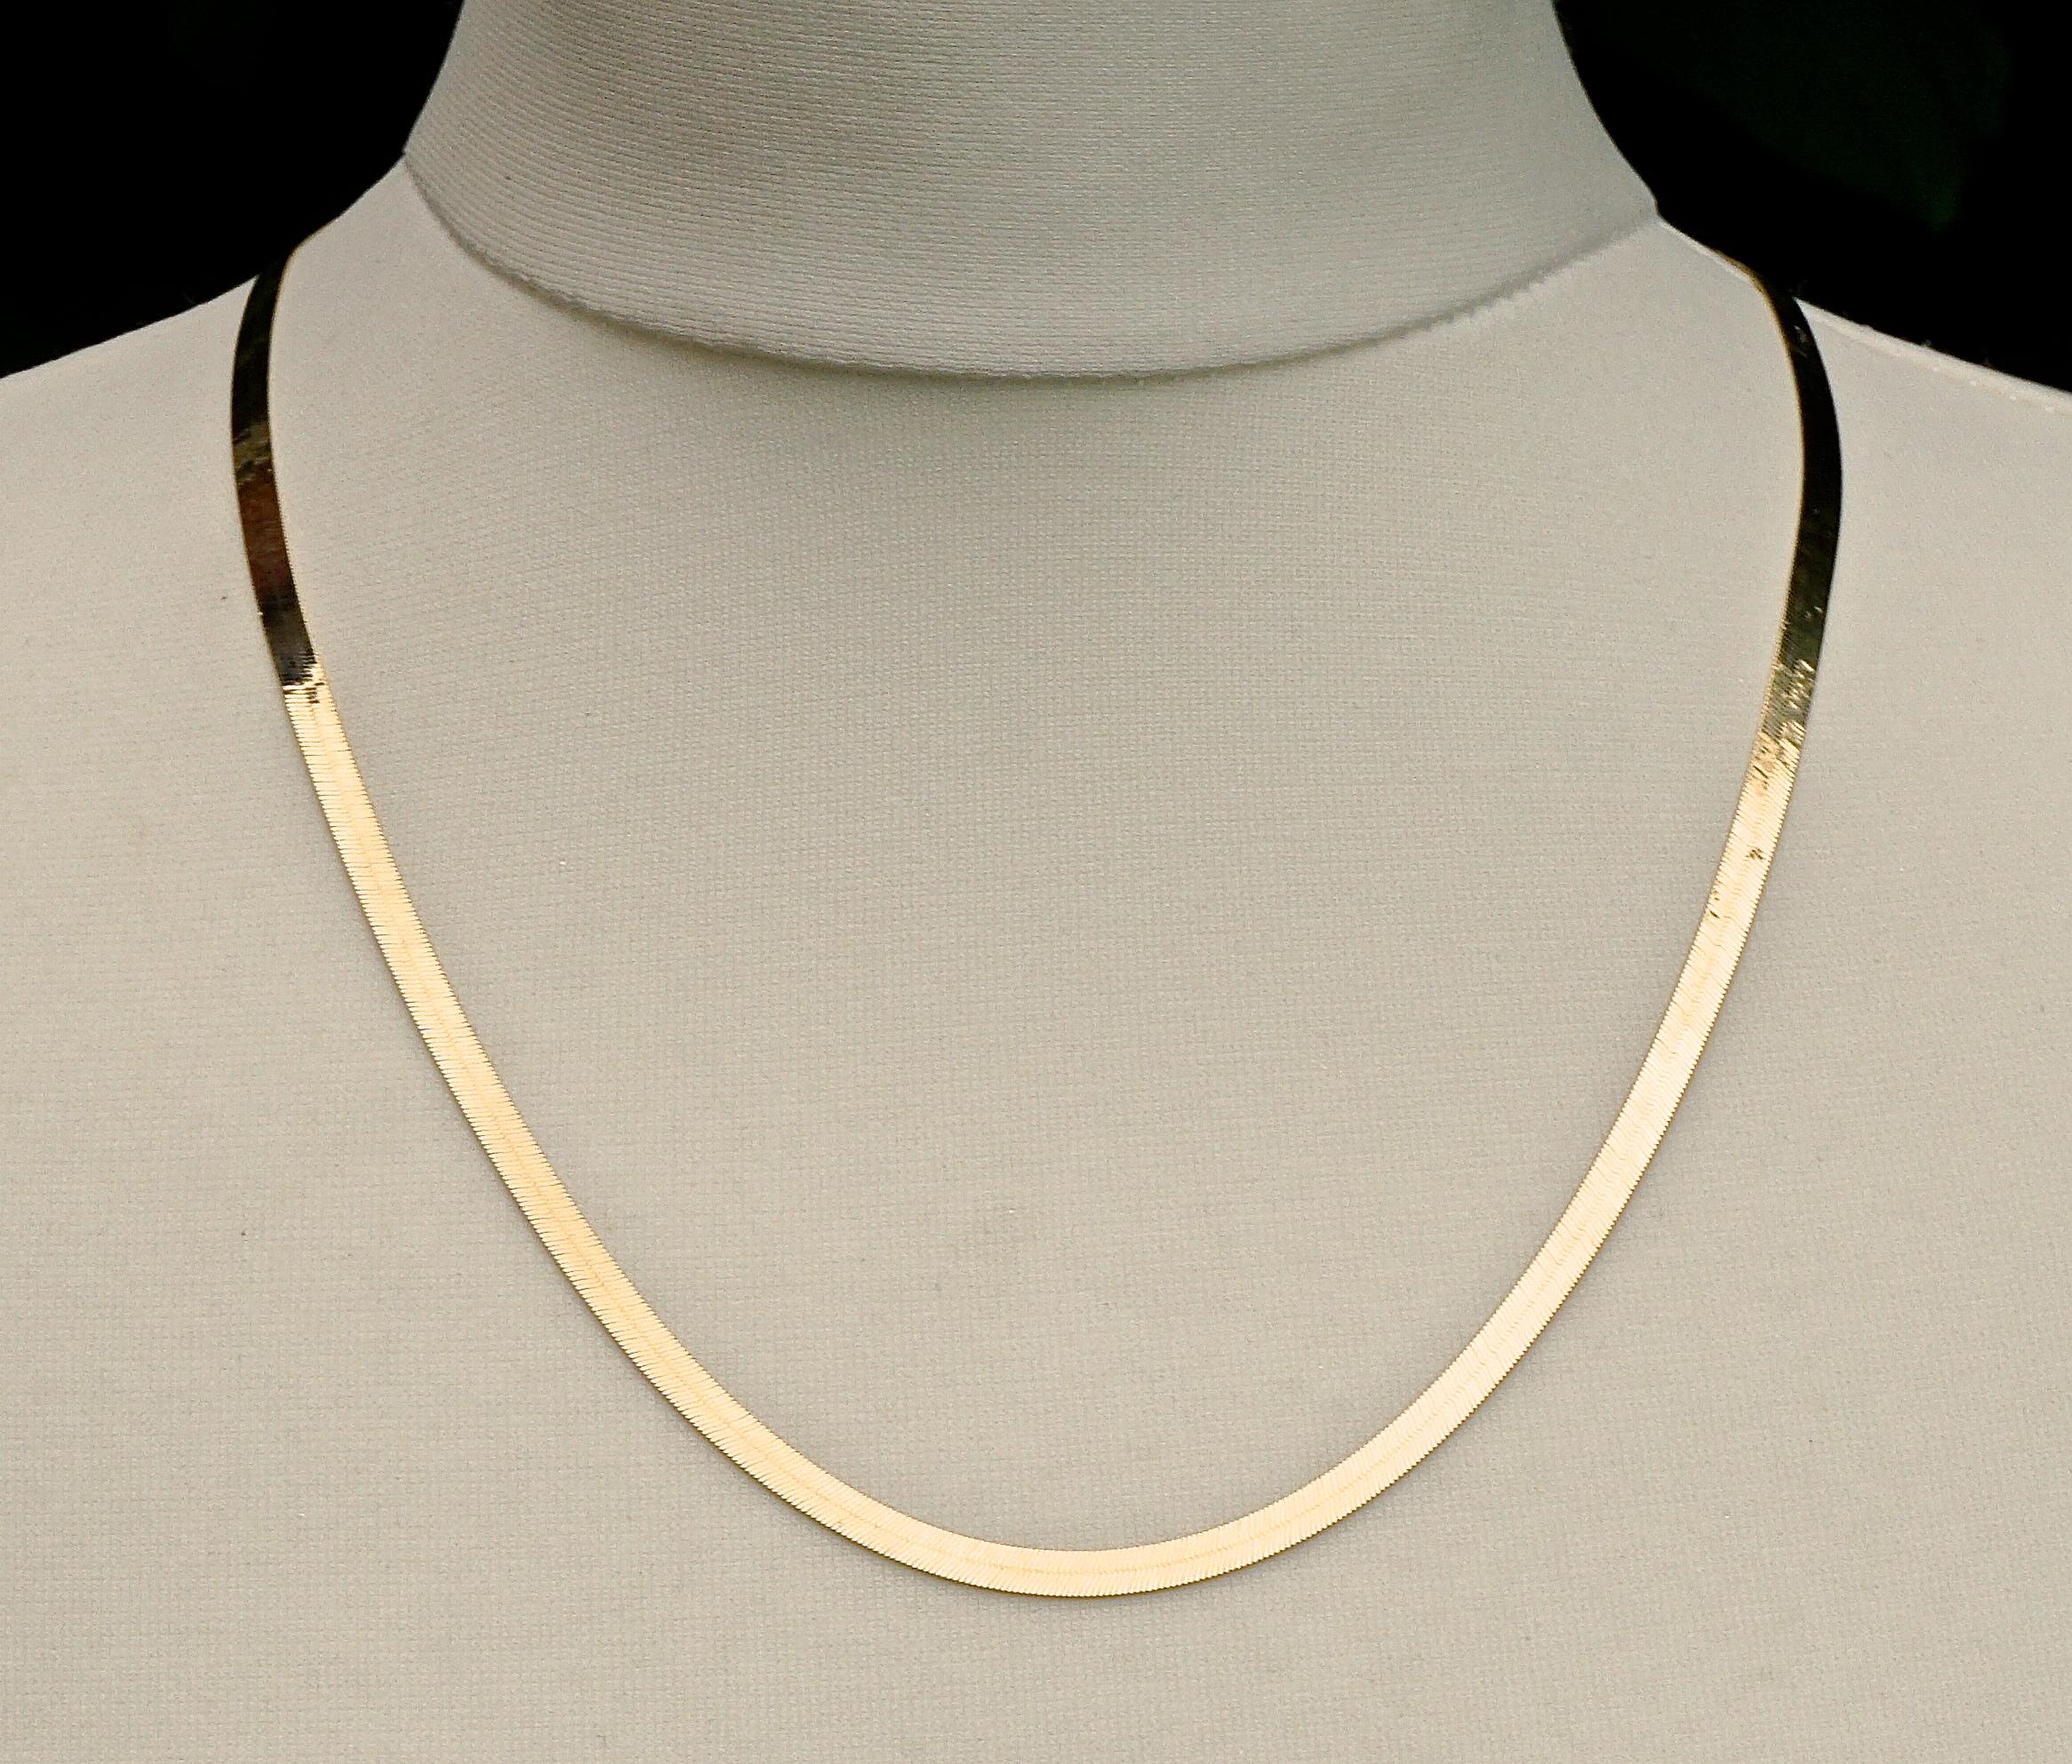 EternaGold Italy 14K gold chain necklace, featuring a beautiful polished fine herringbone link design. The back is textured. Measuring length 56.5cm / 22.24 inches by width 4mm / .16 inch.

This gold vintage Italian necklace looks wonderful